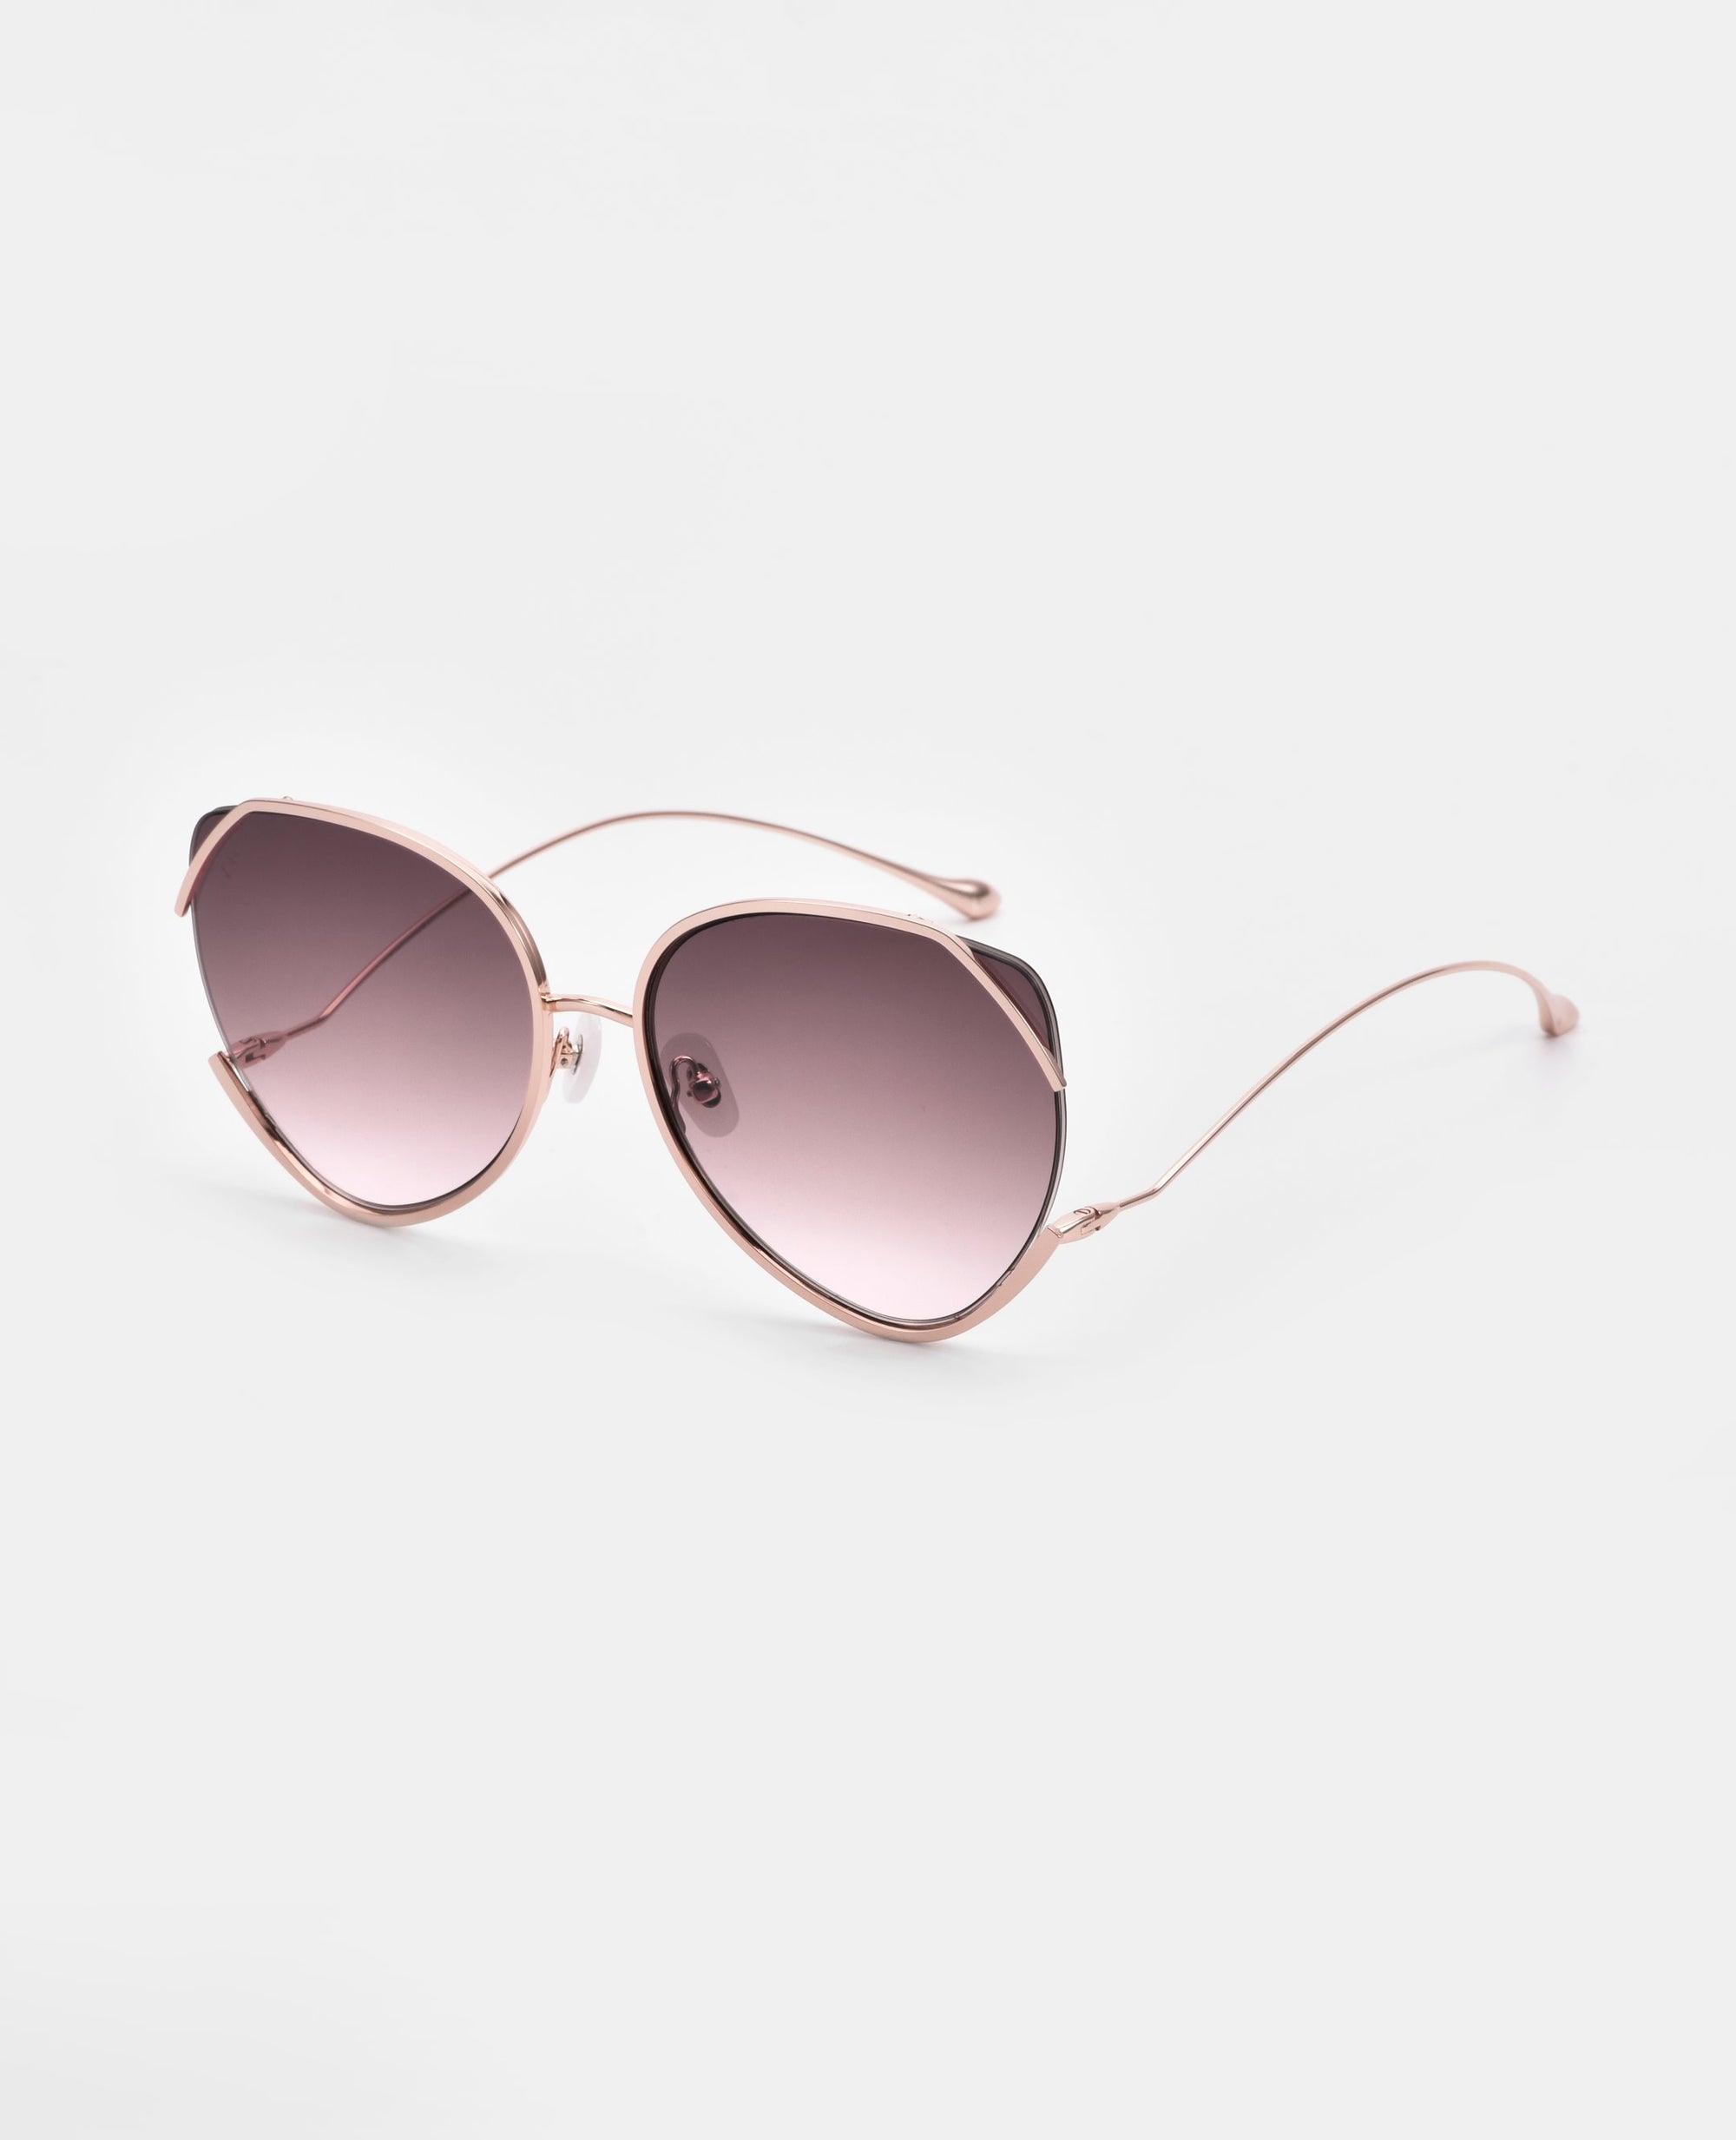 A pair of Wonderland cat-eye sunglasses by For Art&#39;s Sake® with gold-plated stainless steel frames and gradient pink lenses is displayed on a white background. The thin metal arms are slightly curved, adding a stylish detail to the chic design, while providing complete UVA &amp; UVB protection.